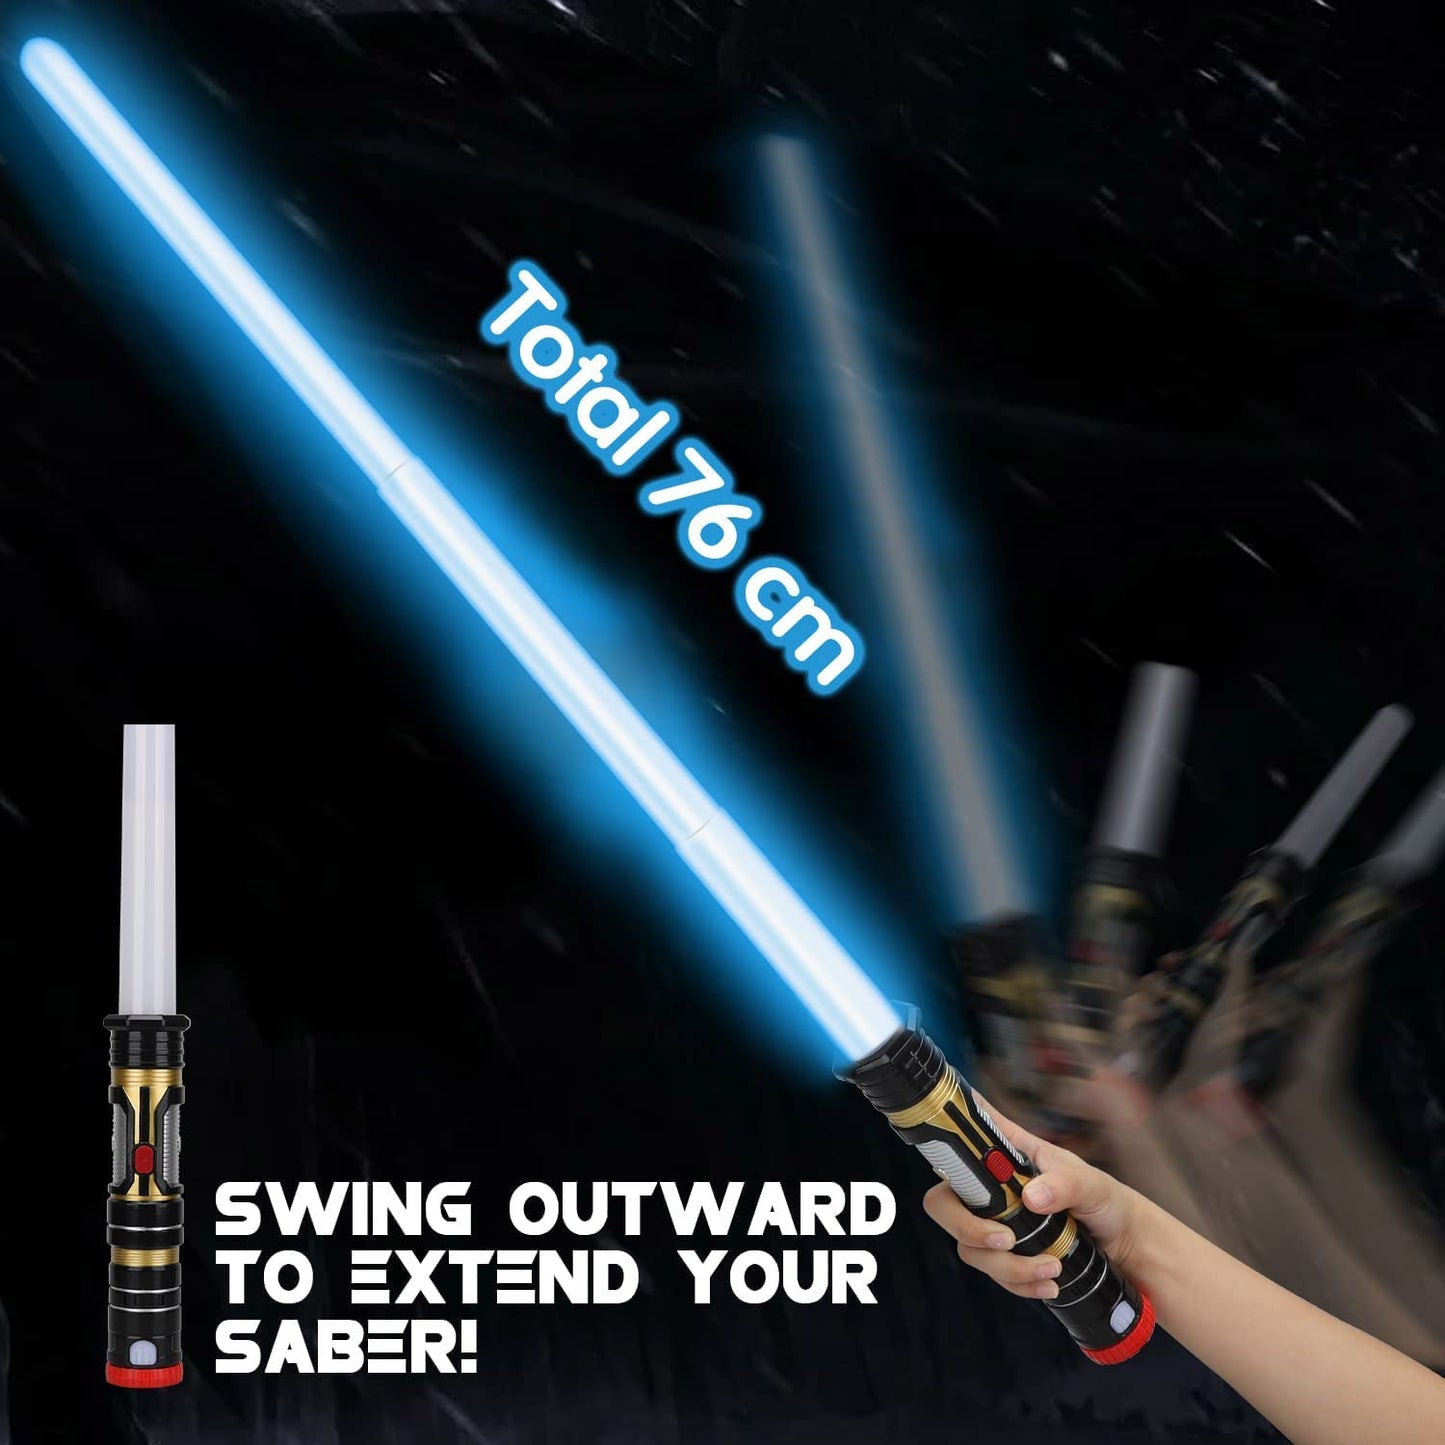 Light Saber Kids - Light up Saber with Sound- 3 Colors Changeable Retractable Lightsaber Sword Toys for Boys Kids Gift Party Favors - 1 Pack